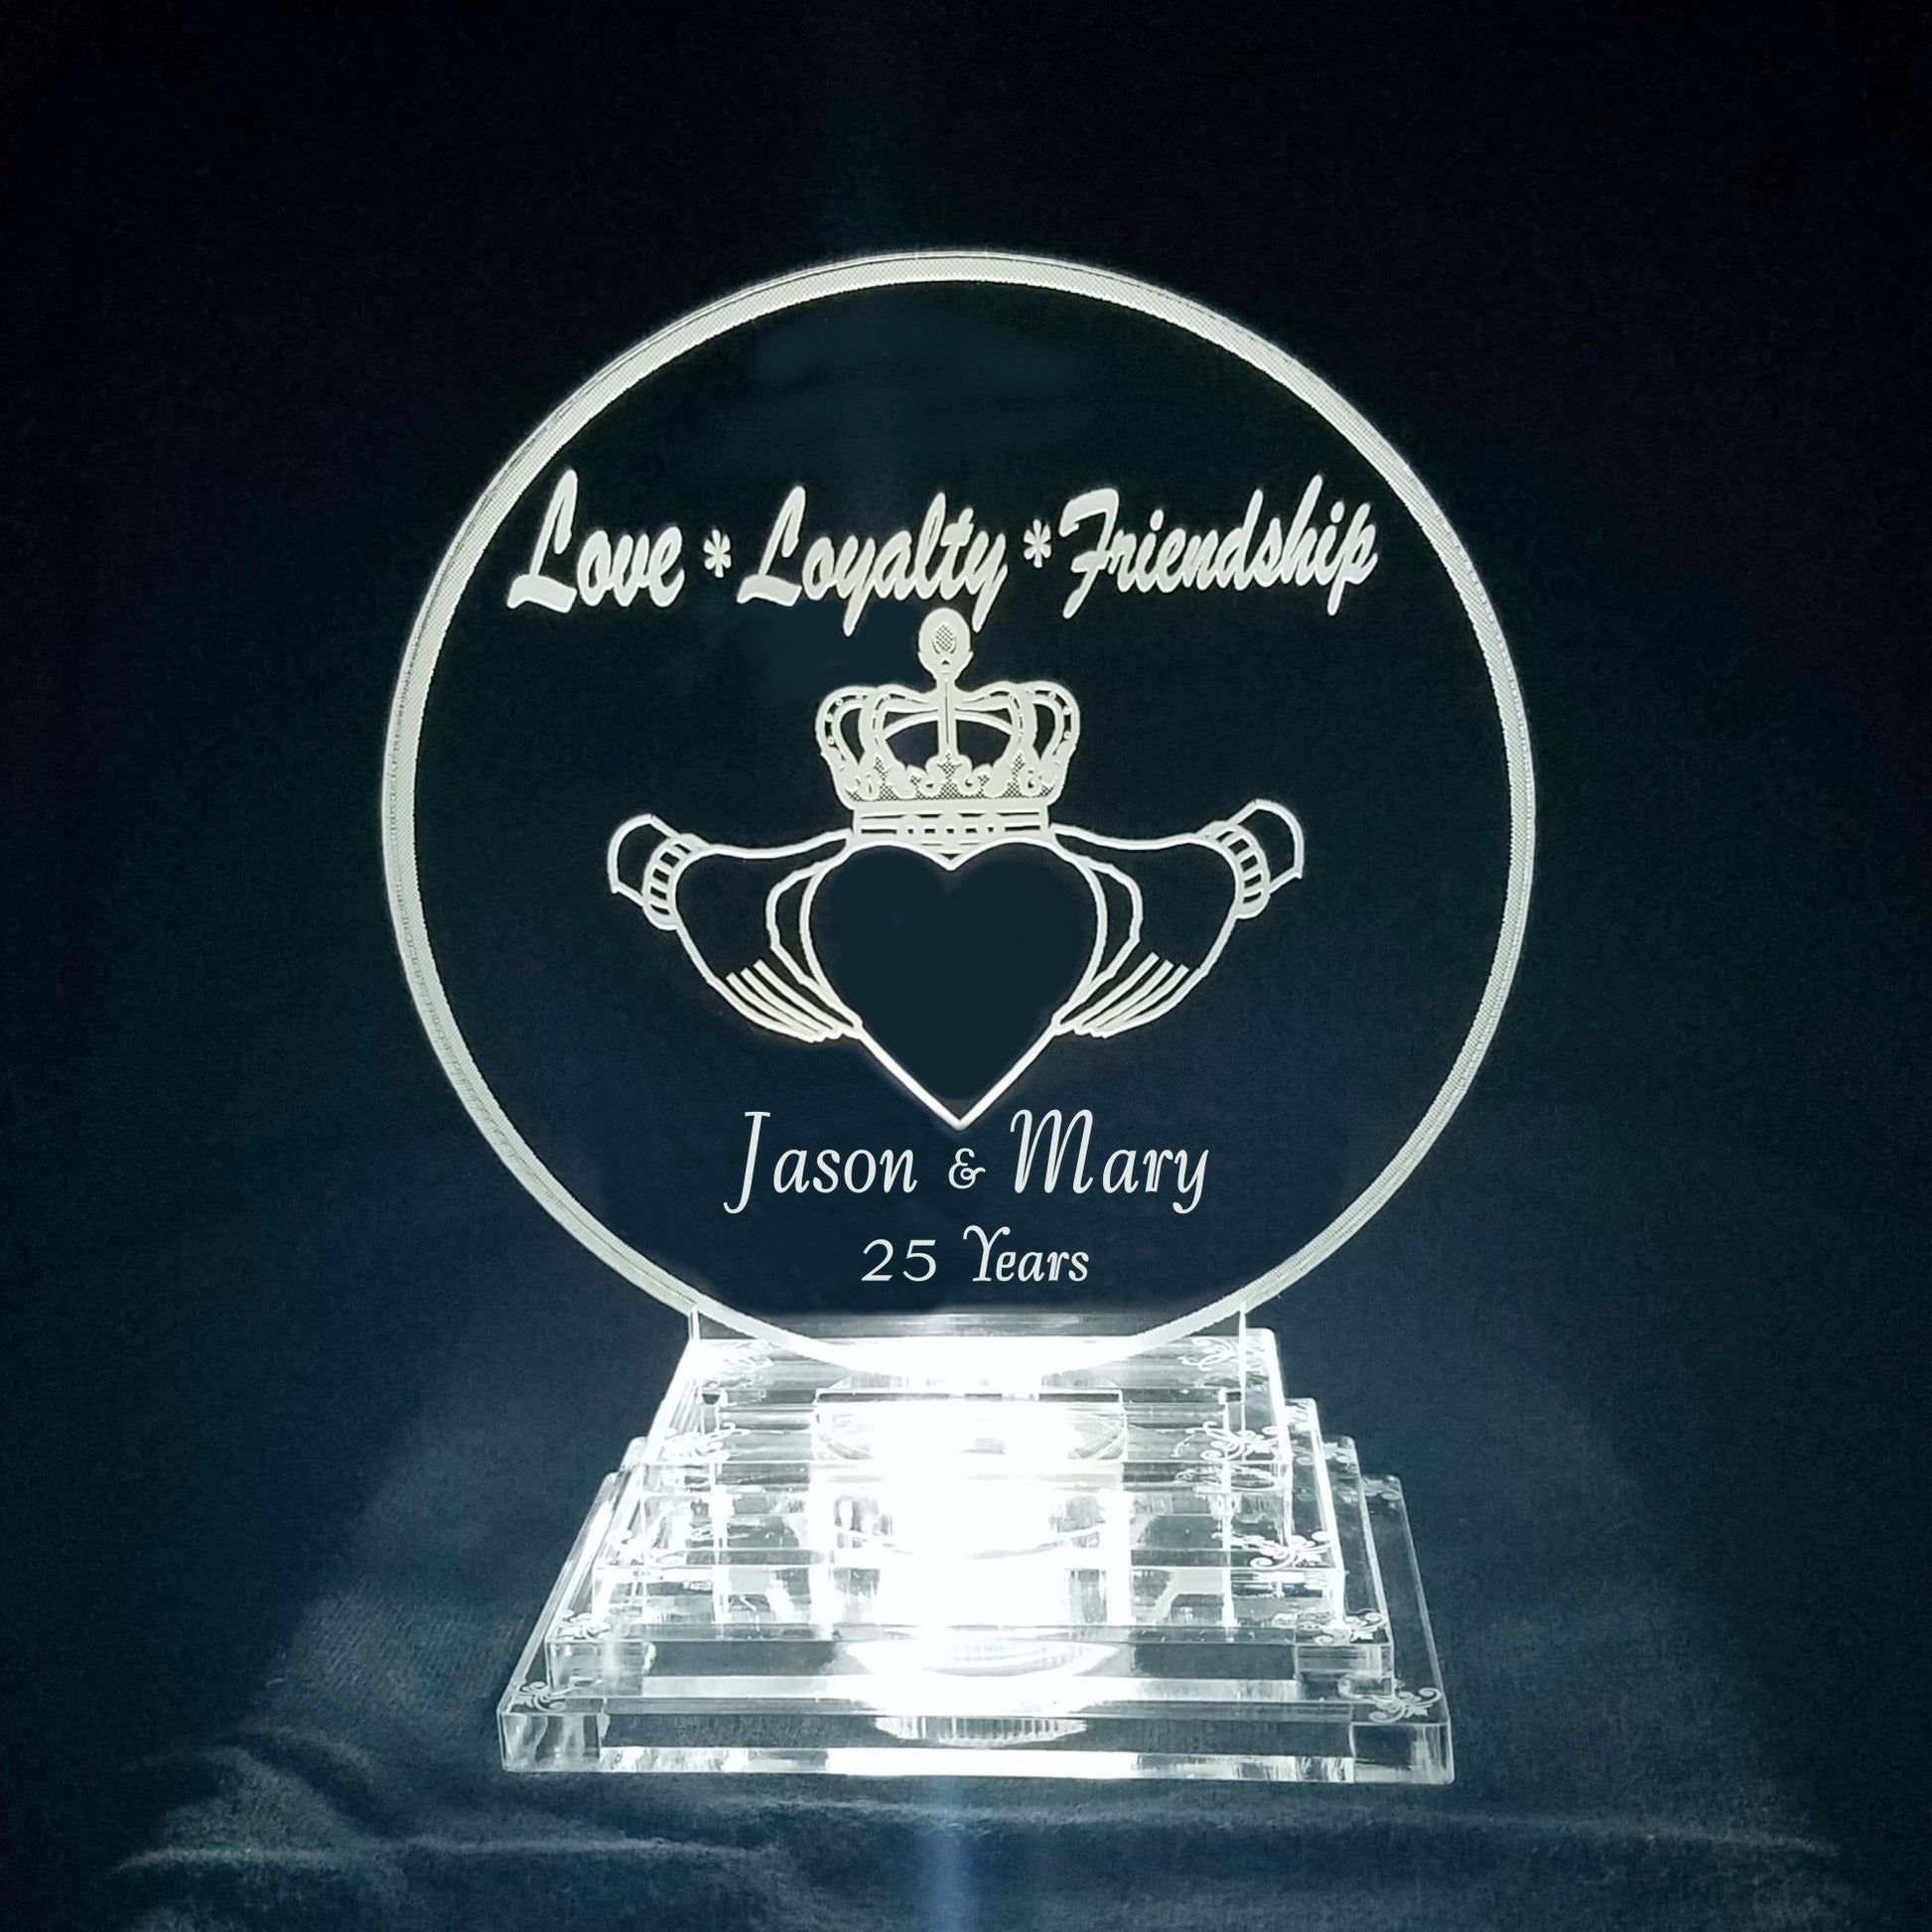 acrylic round cake topper designed with a claddagh, Love, Loyalty and Friendship and engraved with names and number of years married